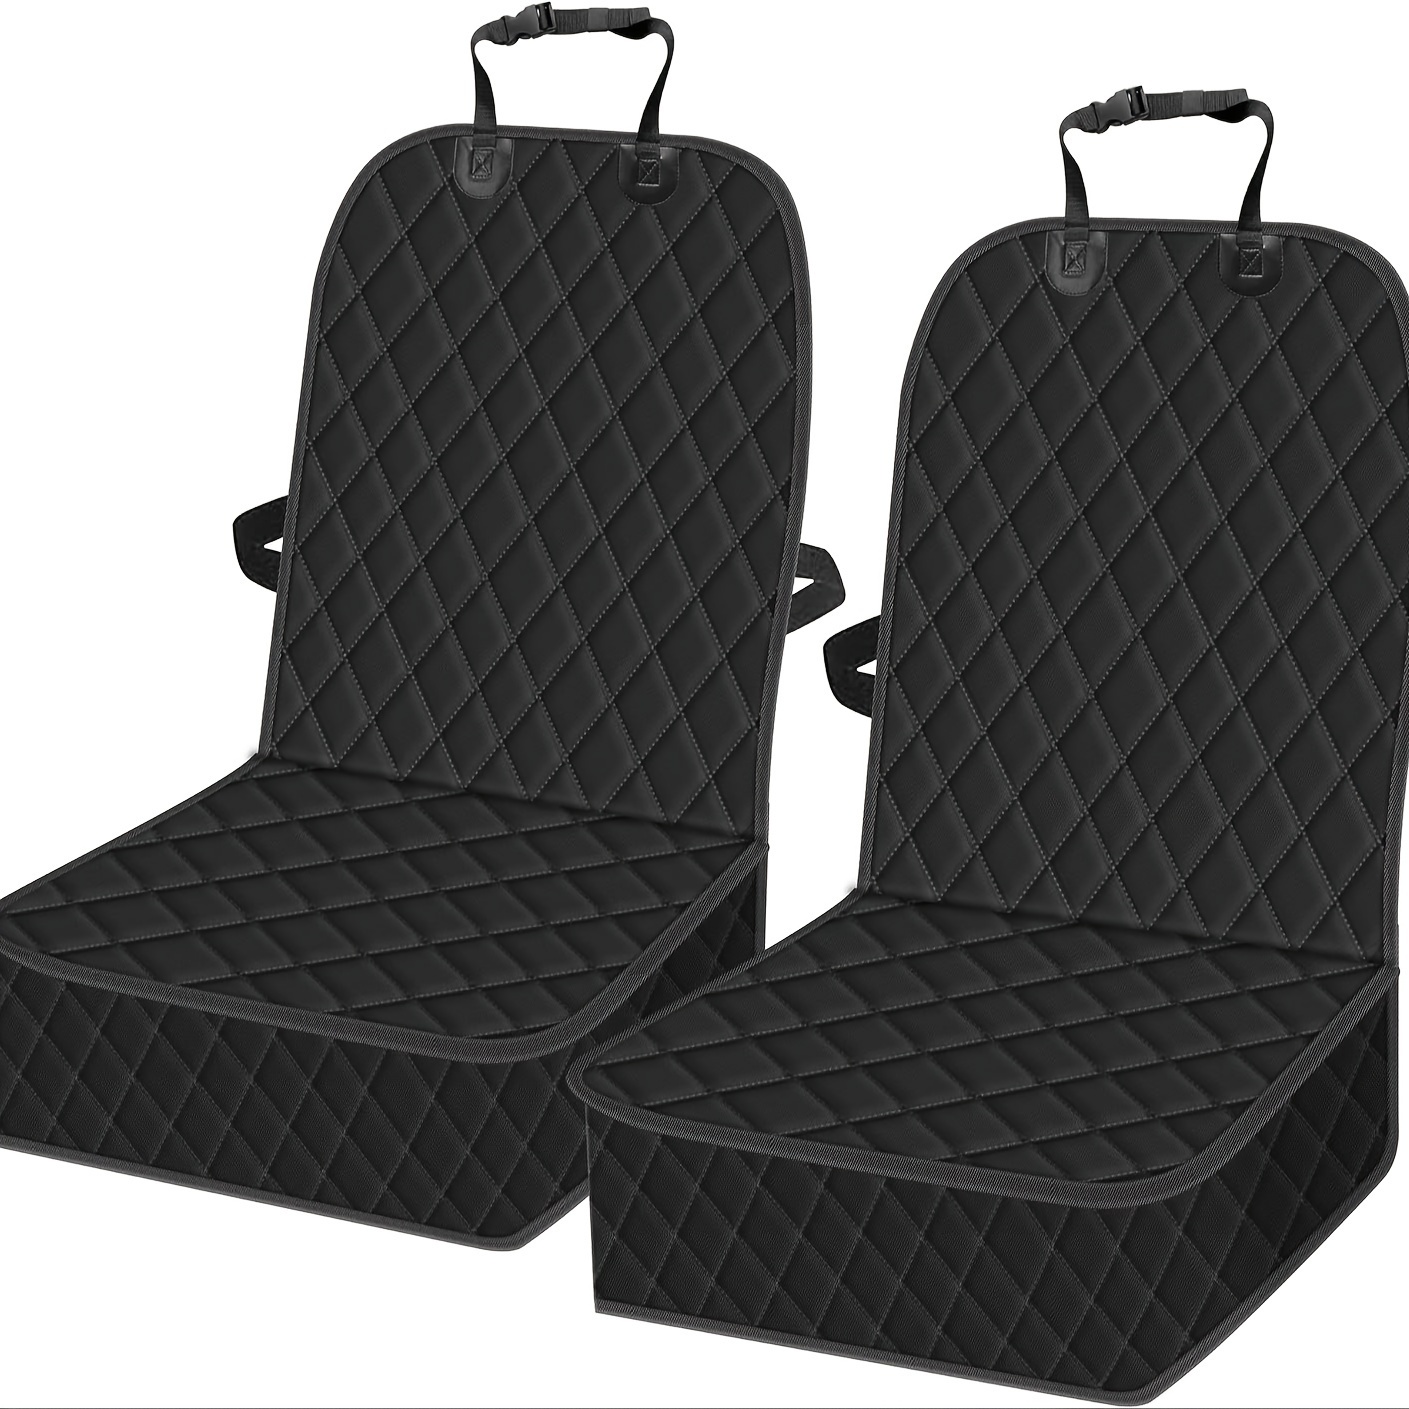 

2-pack Waterproof Pet Car Seat Covers, Universal Fit Polyester Blend Dog Front Seat Protection Covers For Cars, Trucks, Suvs - Non-slip, Scratchproof, Easy Seat Belt Access & Full Coverage